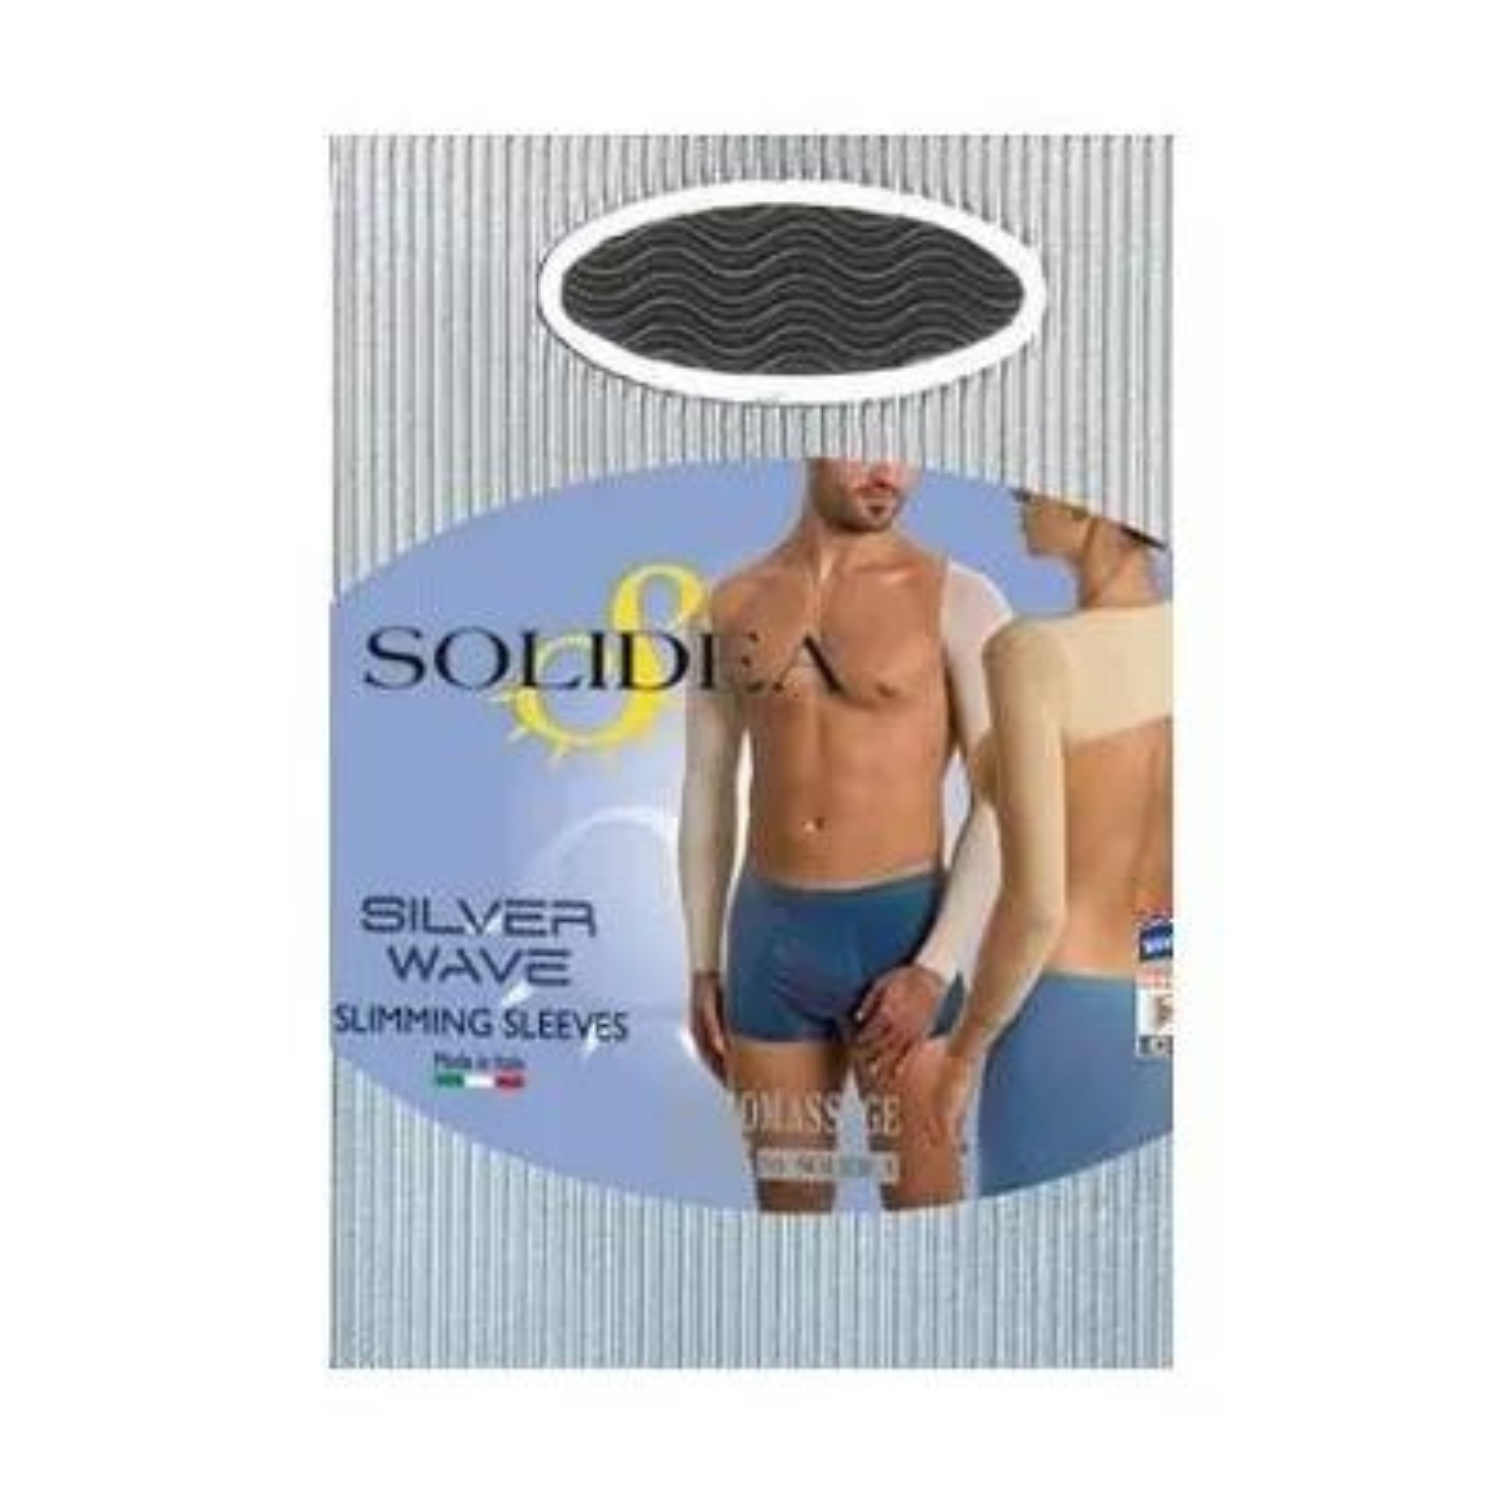 Solidea Silver Wave Slimming Sleeves Hihat 1S Musta